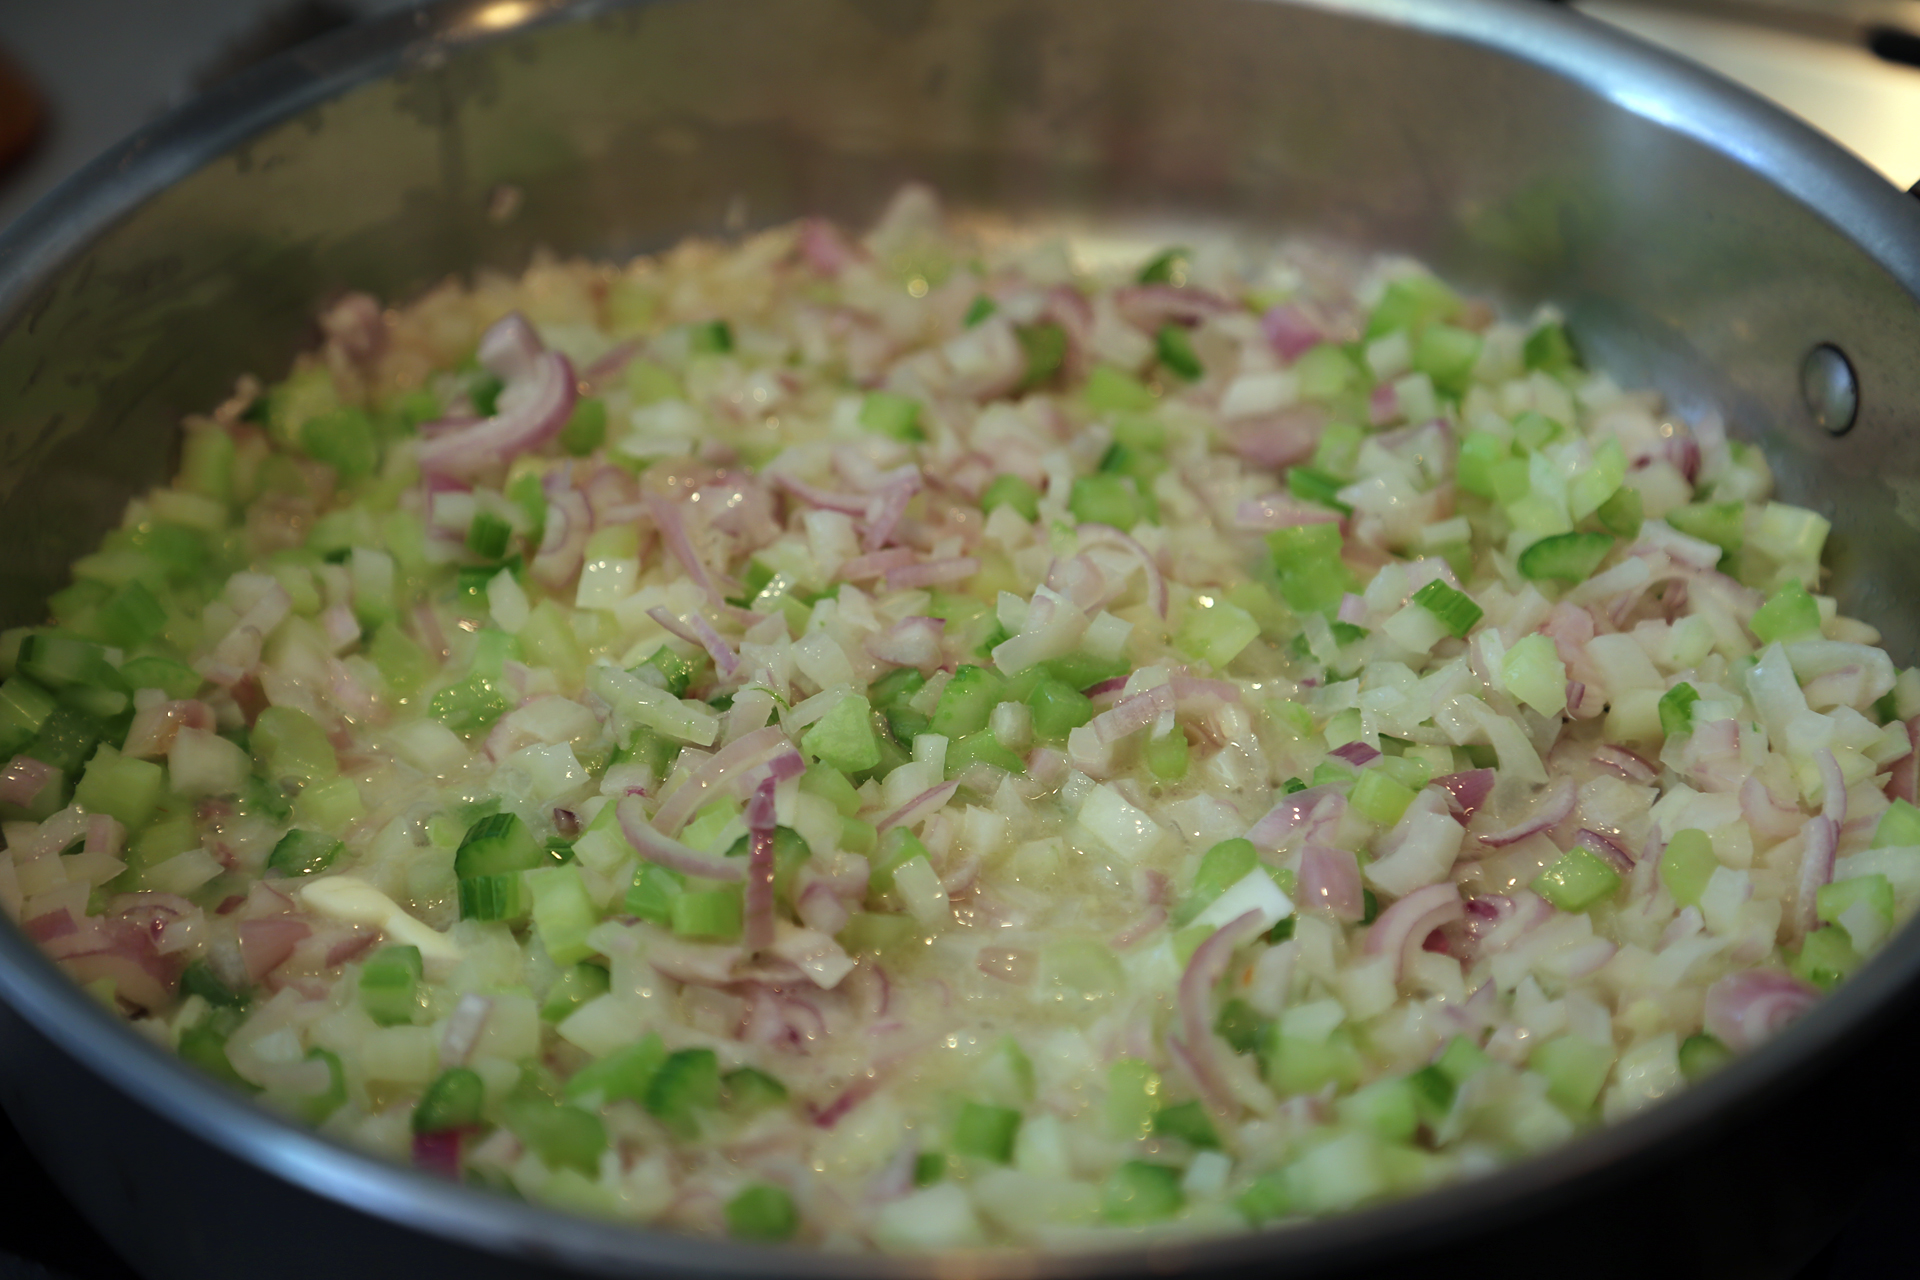 In a large frying pan, melt the butter over medium-high heat. Add the prepped onion, shallots, celery, and a pinch of salt.